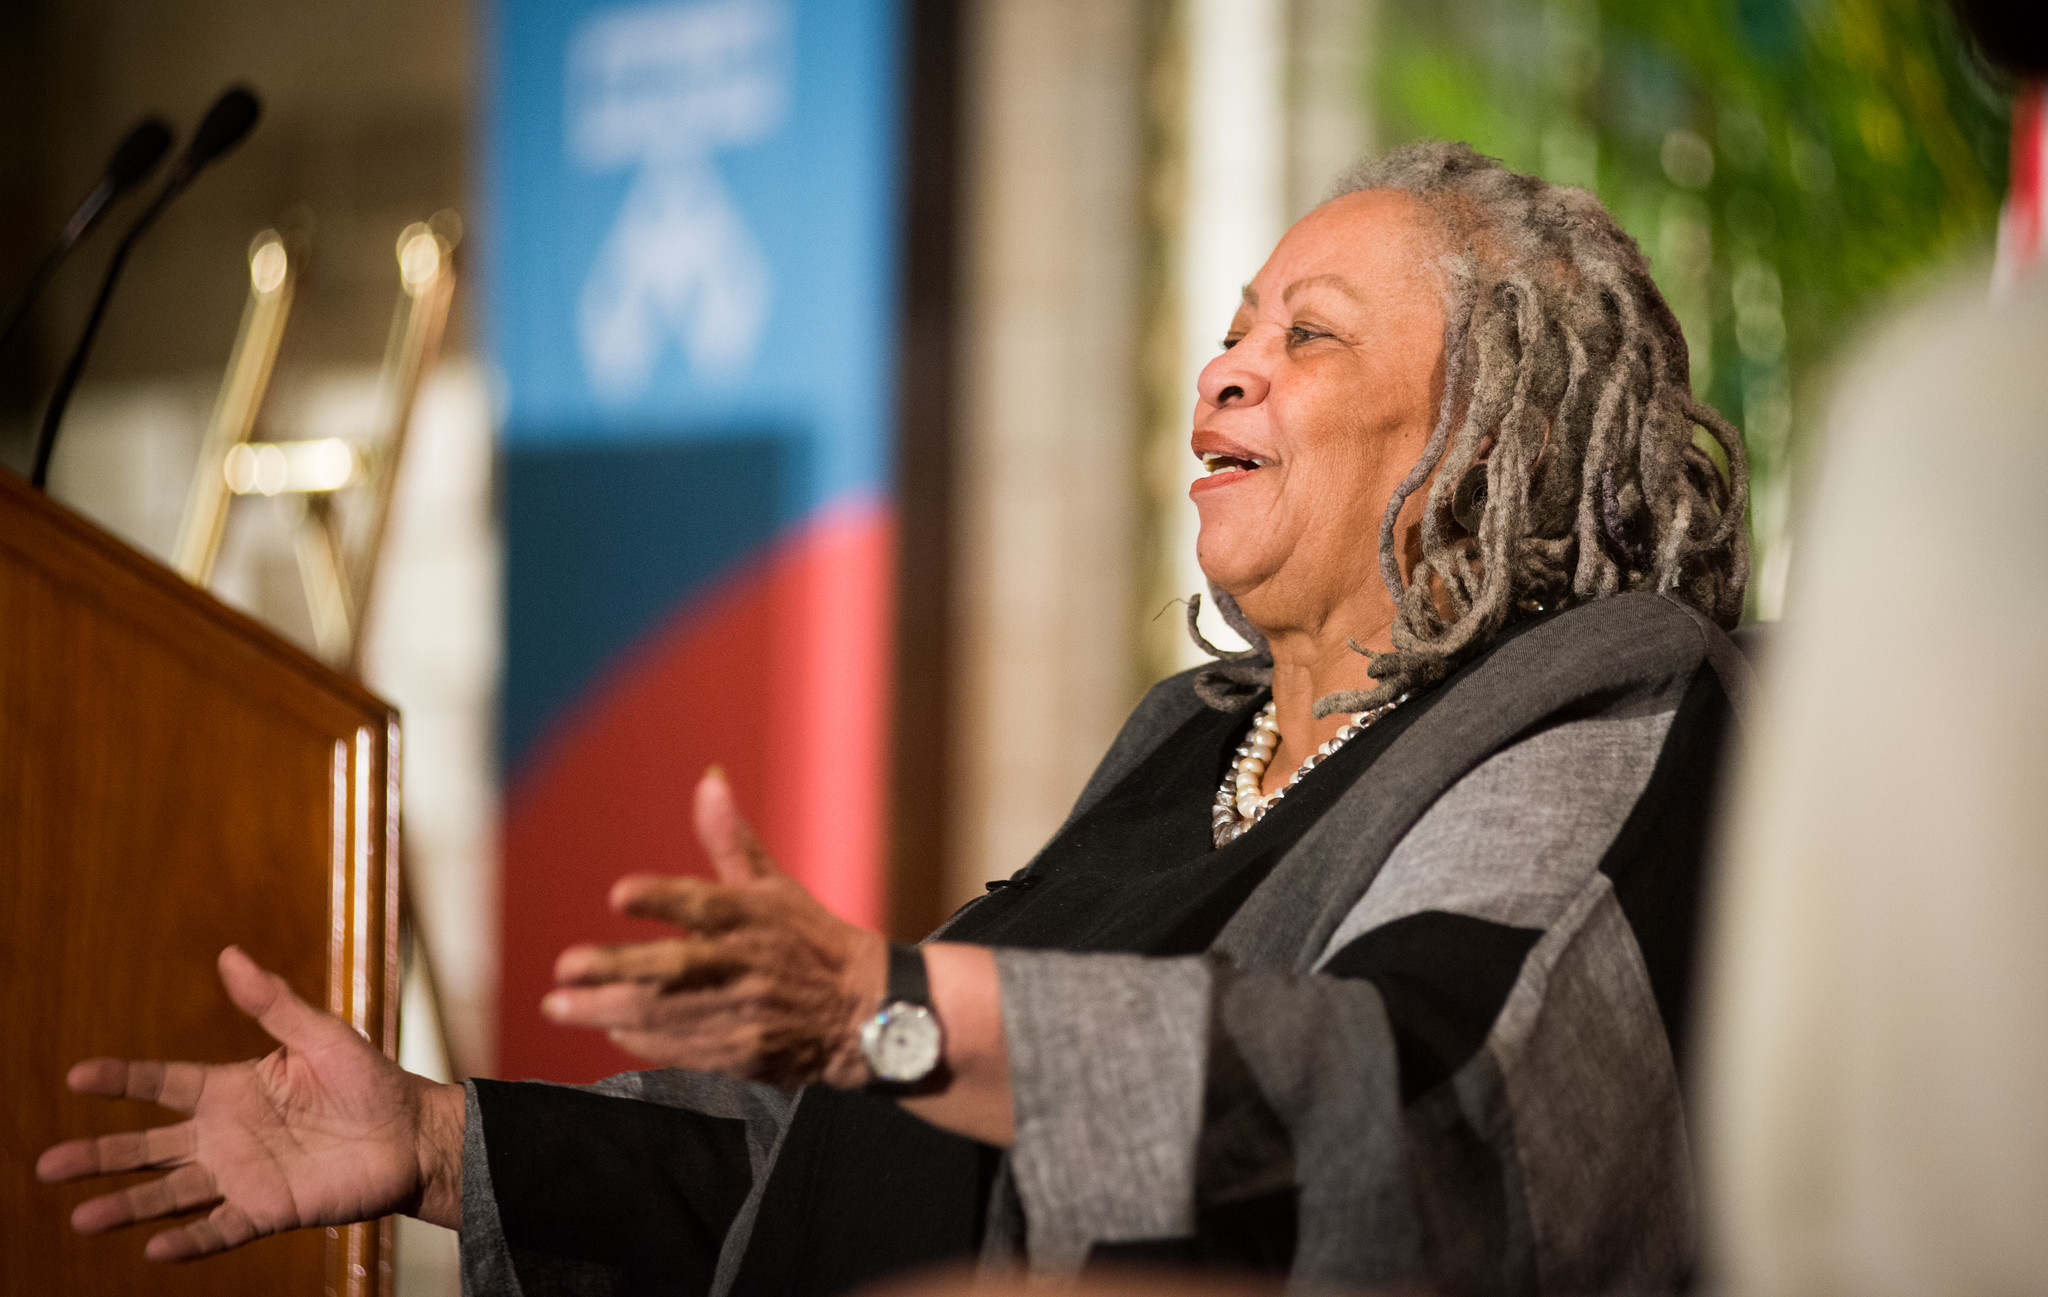 Toni Morrison reaches out her arms on stage